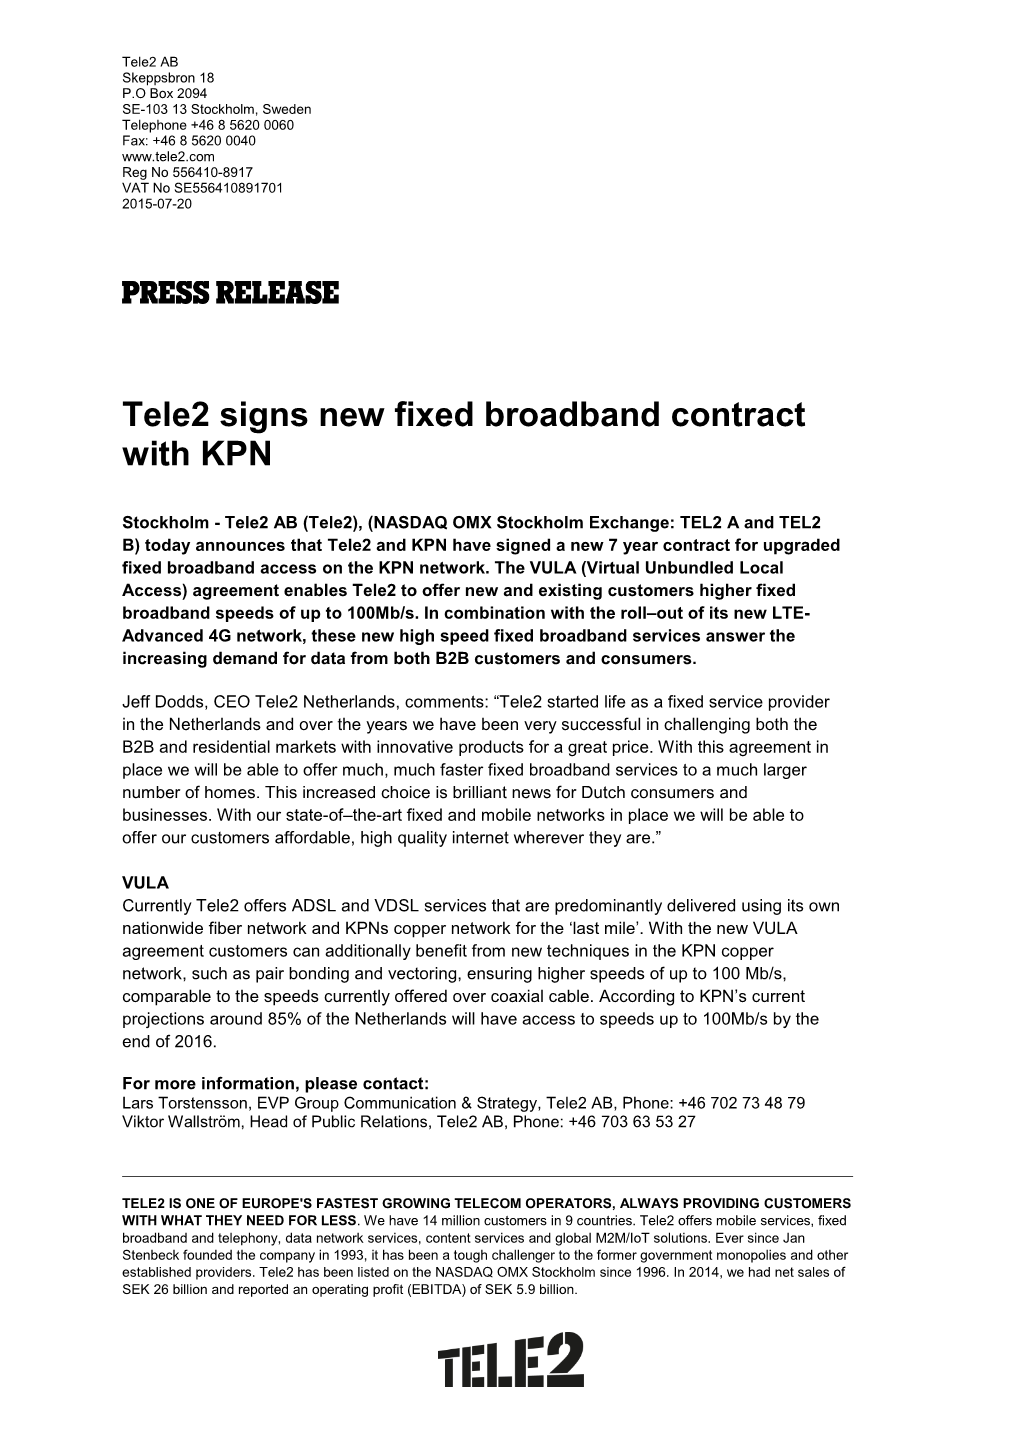 Tele2 Signs New Fixed Broadband Contract with KPN